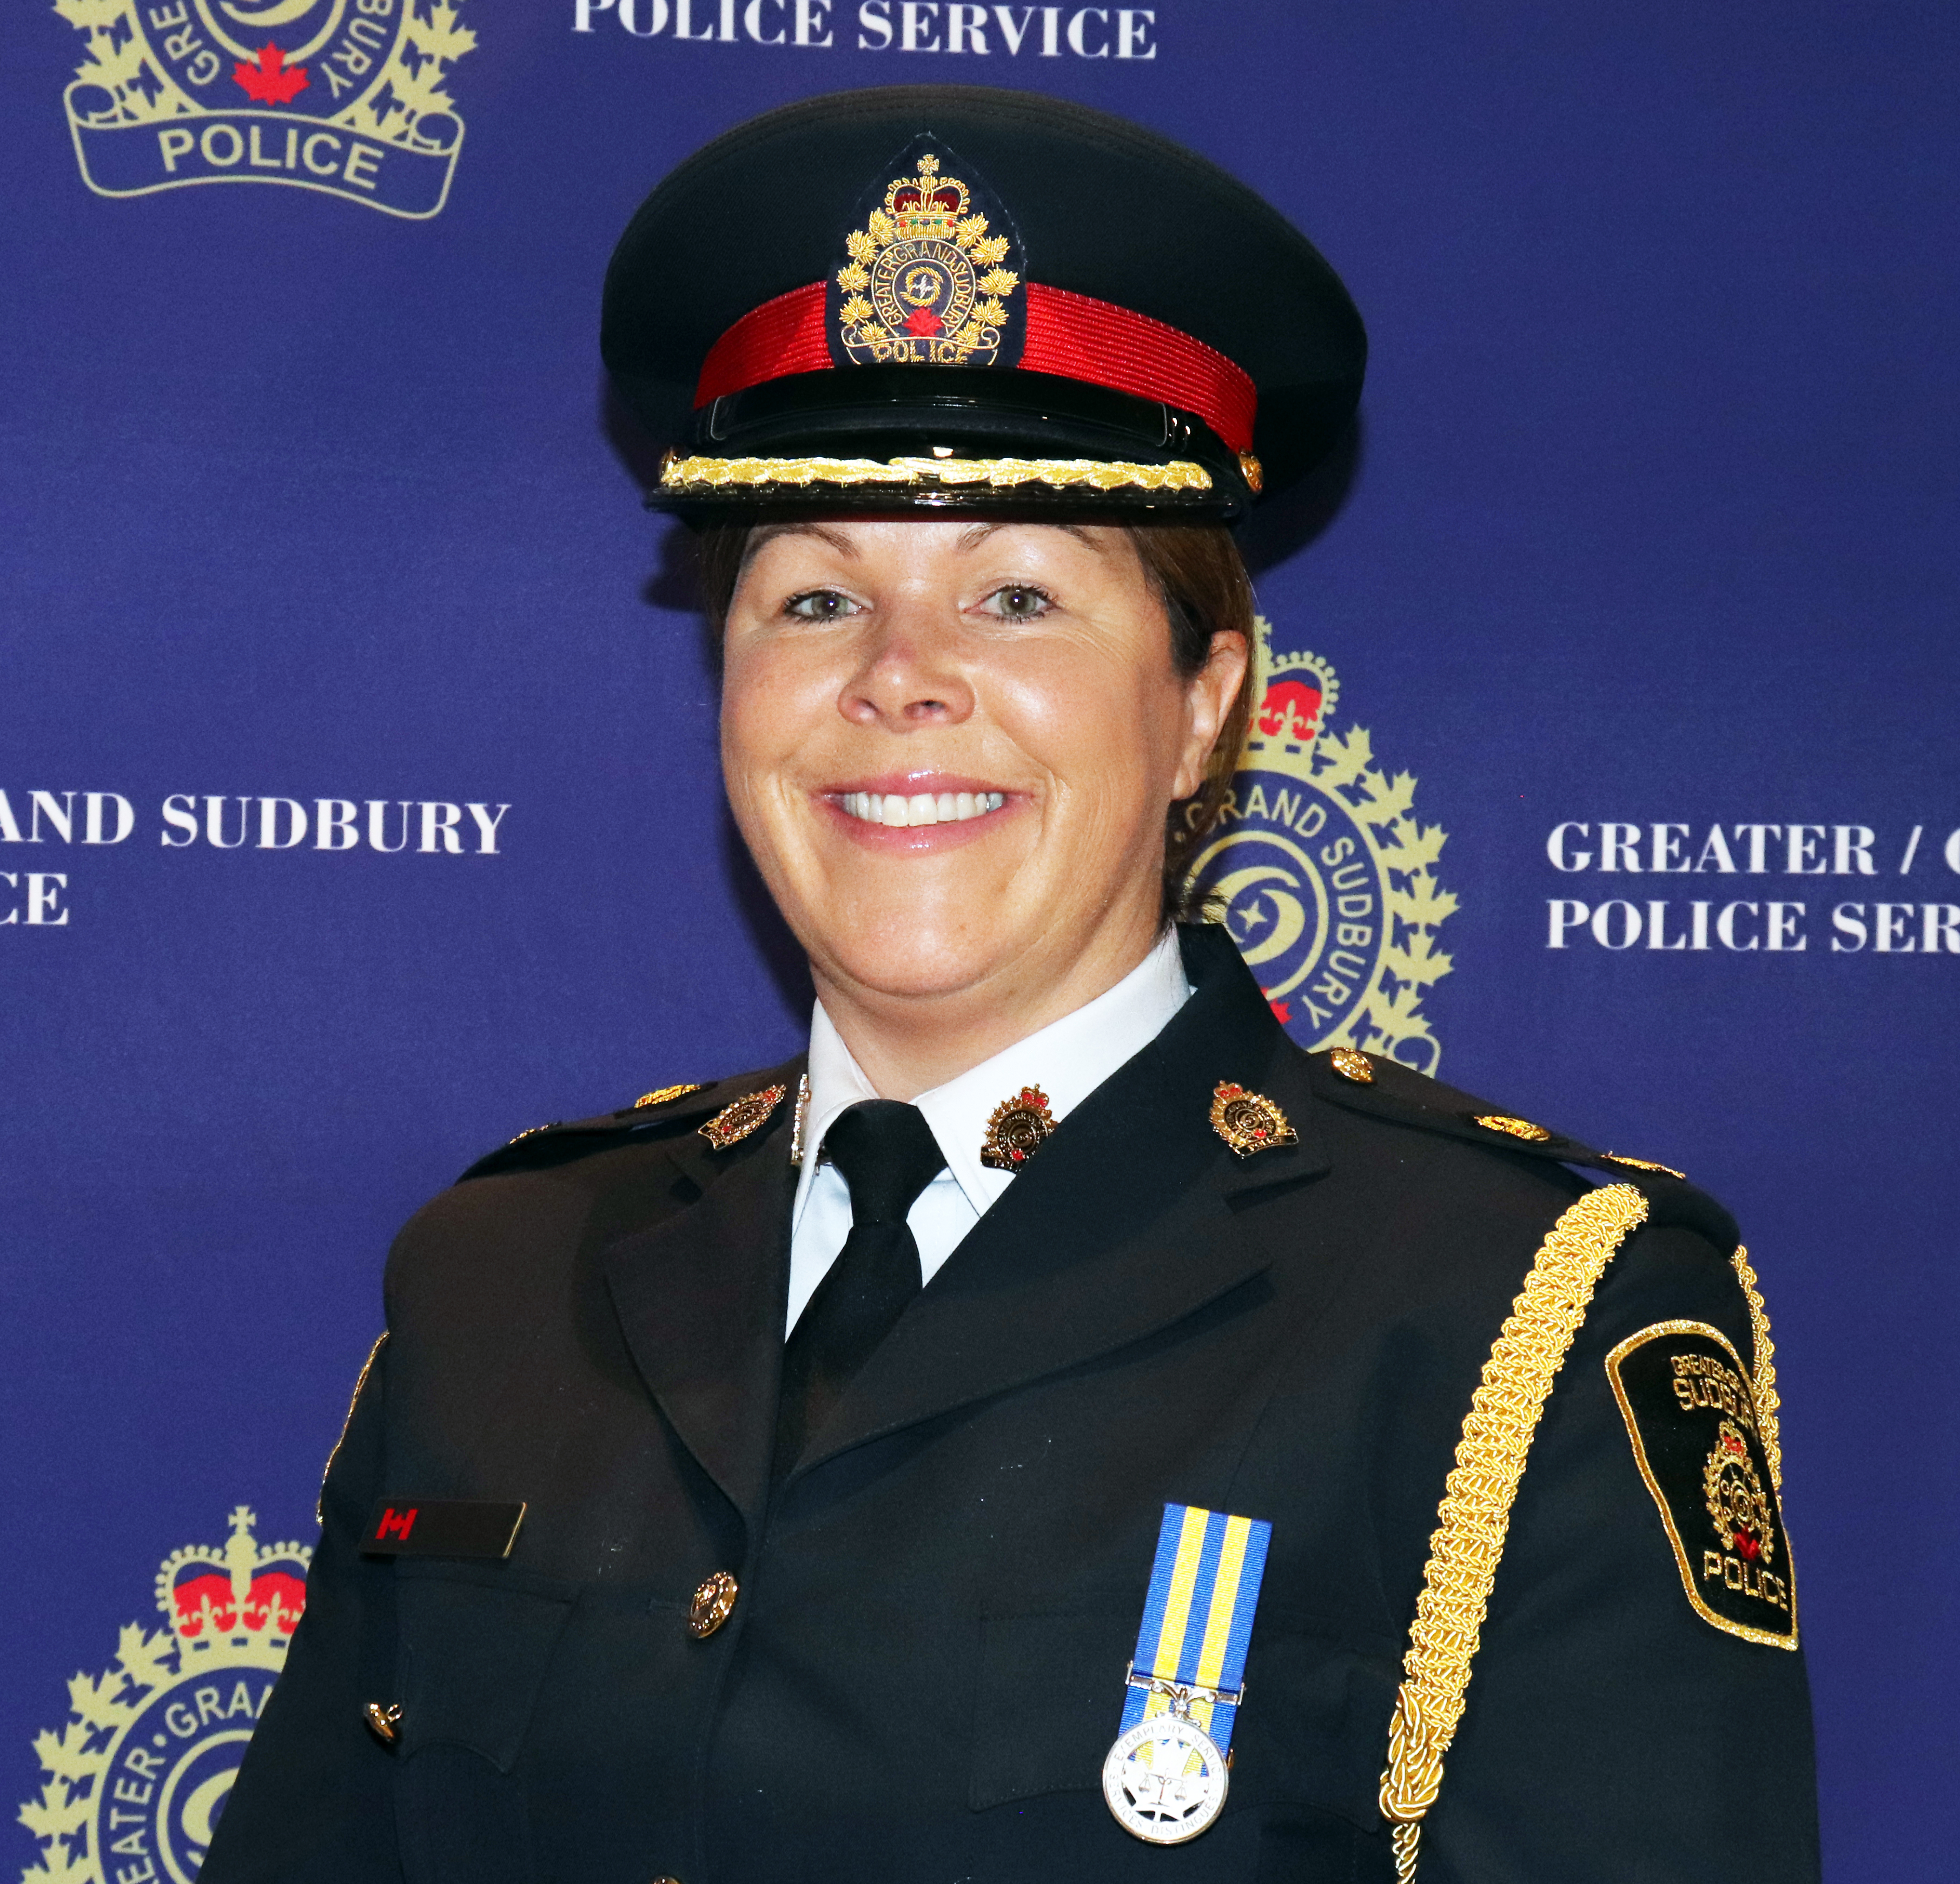 Deputy Chief of Police in uniform smiling